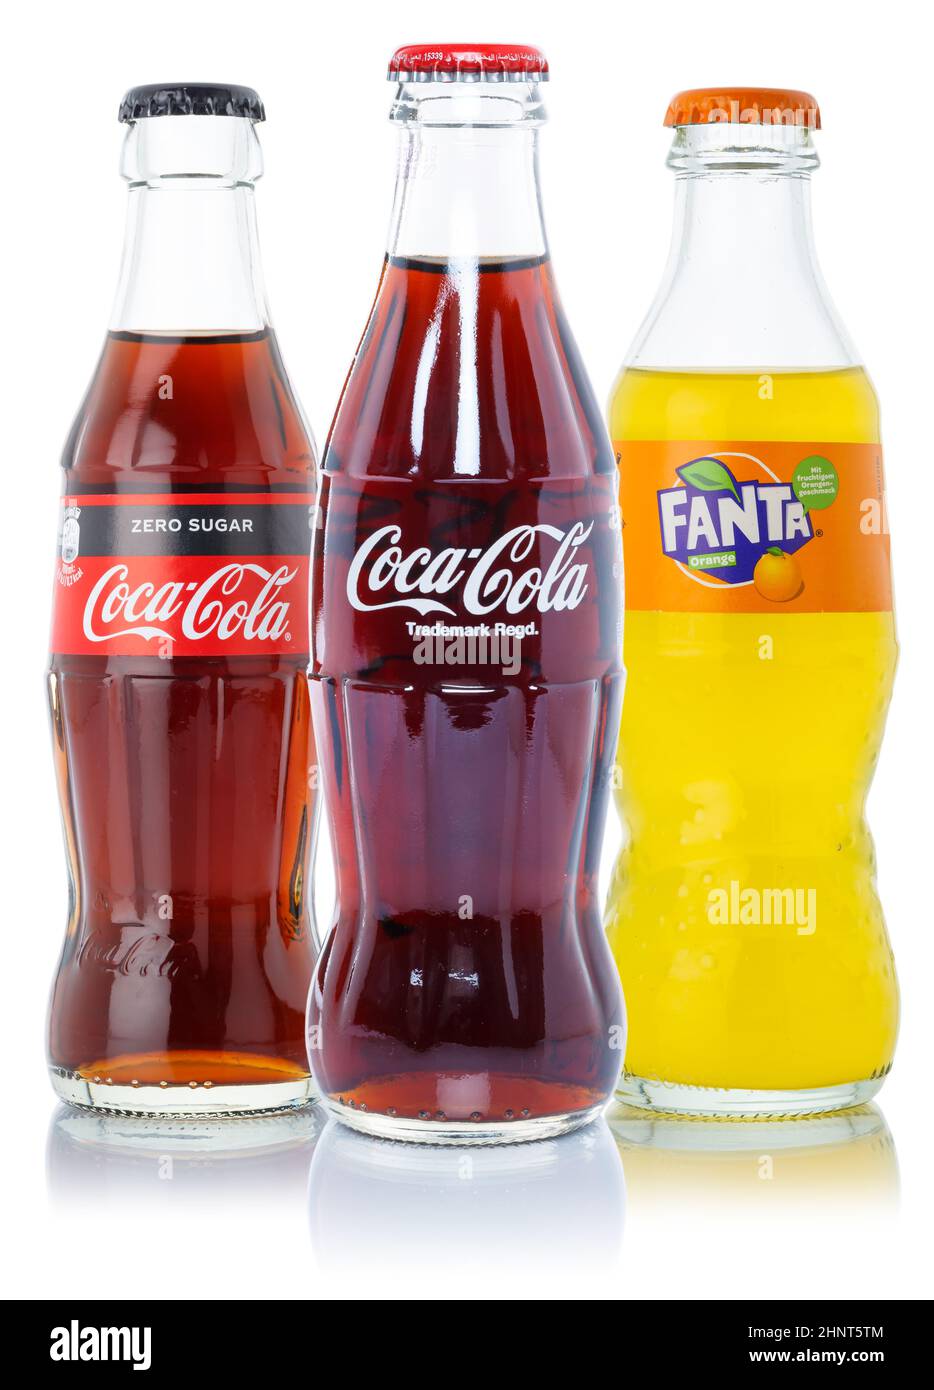 Coca Cola Coca-Cola Fanta products lemonade soda drinks in bottles isolated on a white background Stock Photo